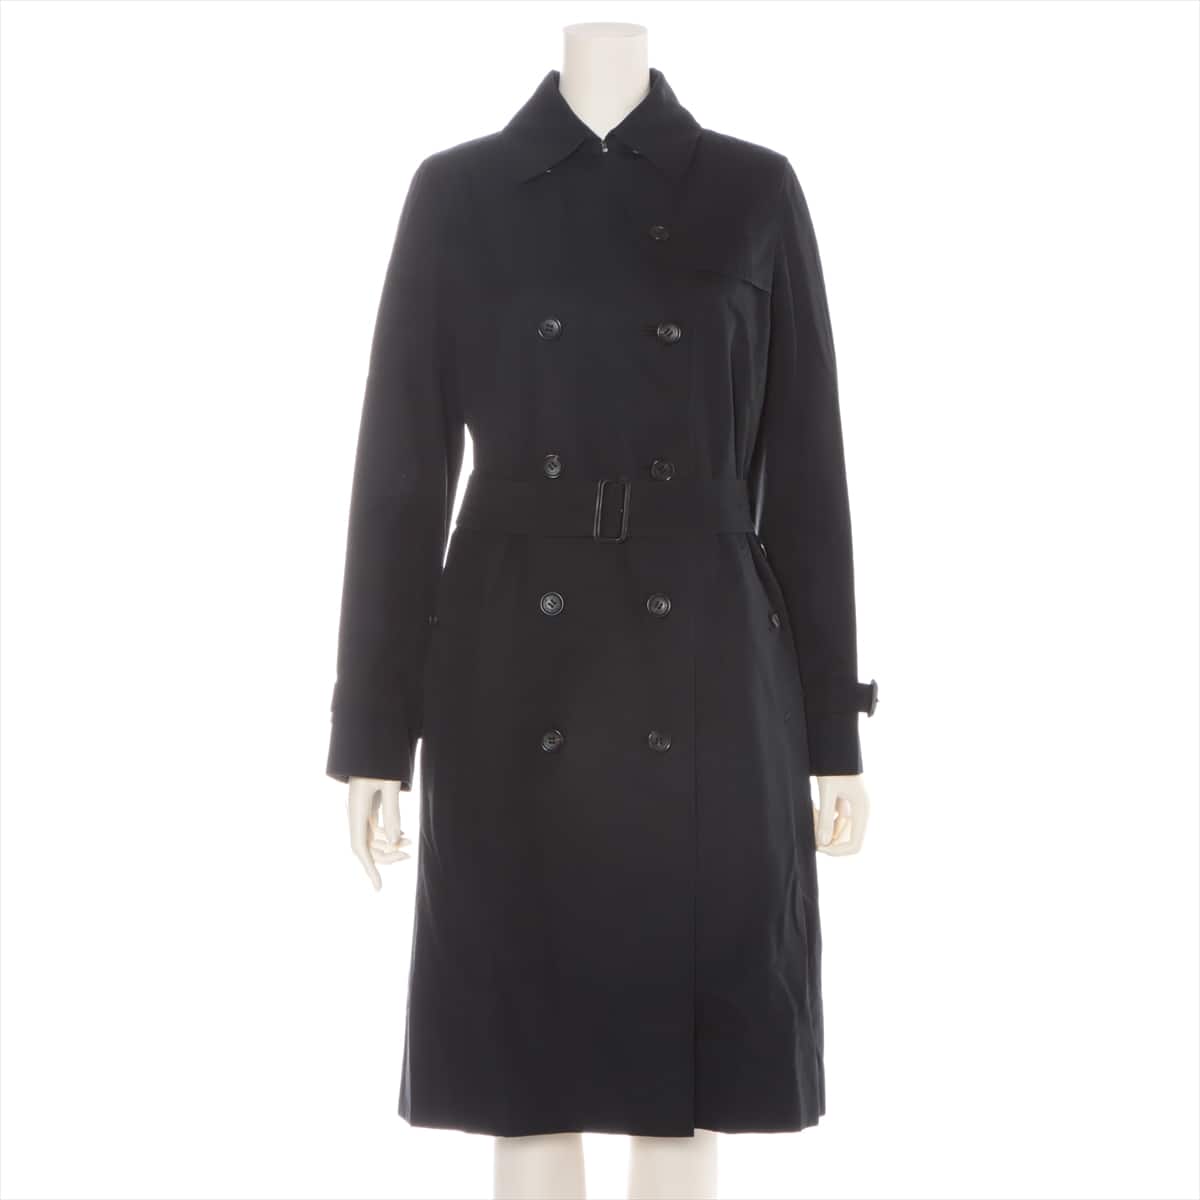 Burberry London Cotton Trench coat 36 Ladies' Black Lined  embroidered initials